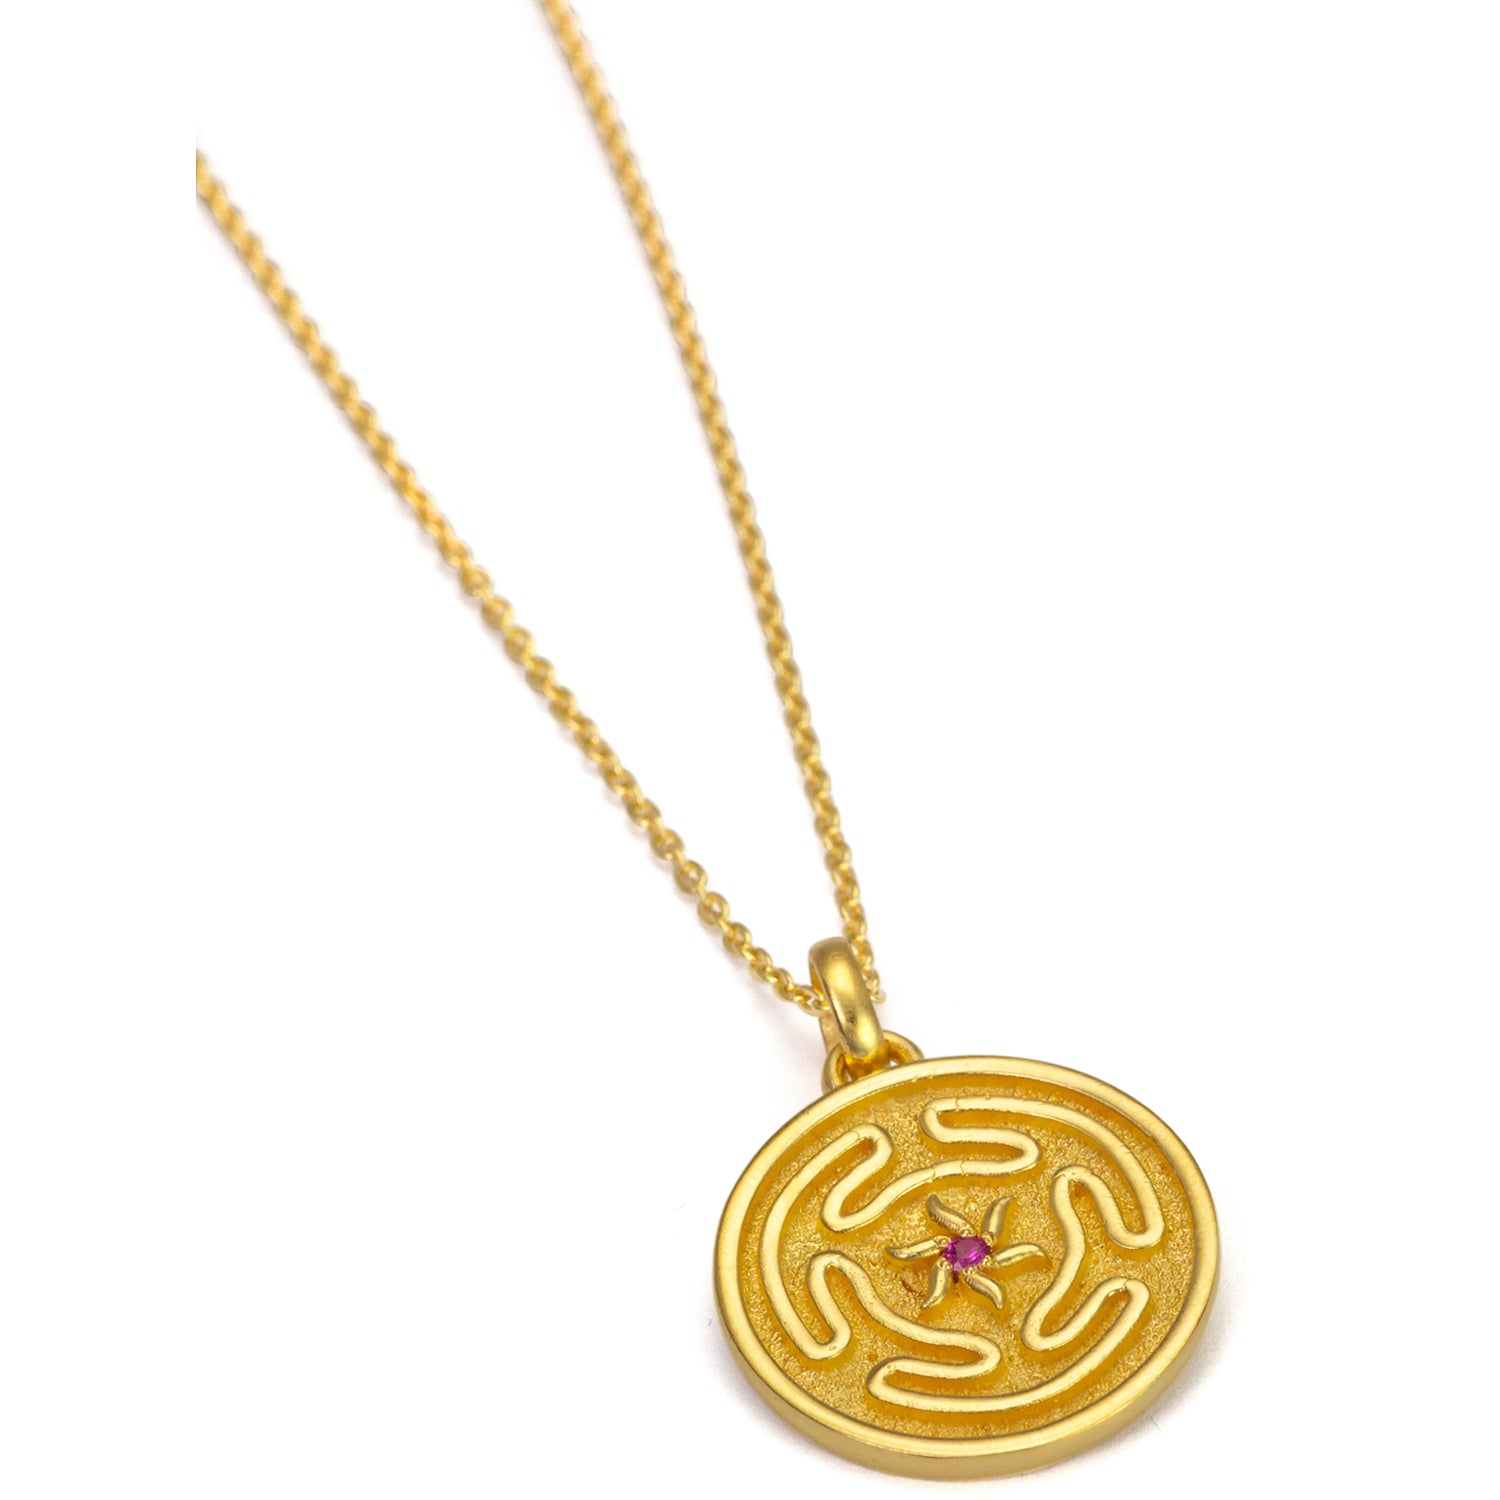 Hecate's wheel pendant with ruby made of high-quality gold-plated sterling silver